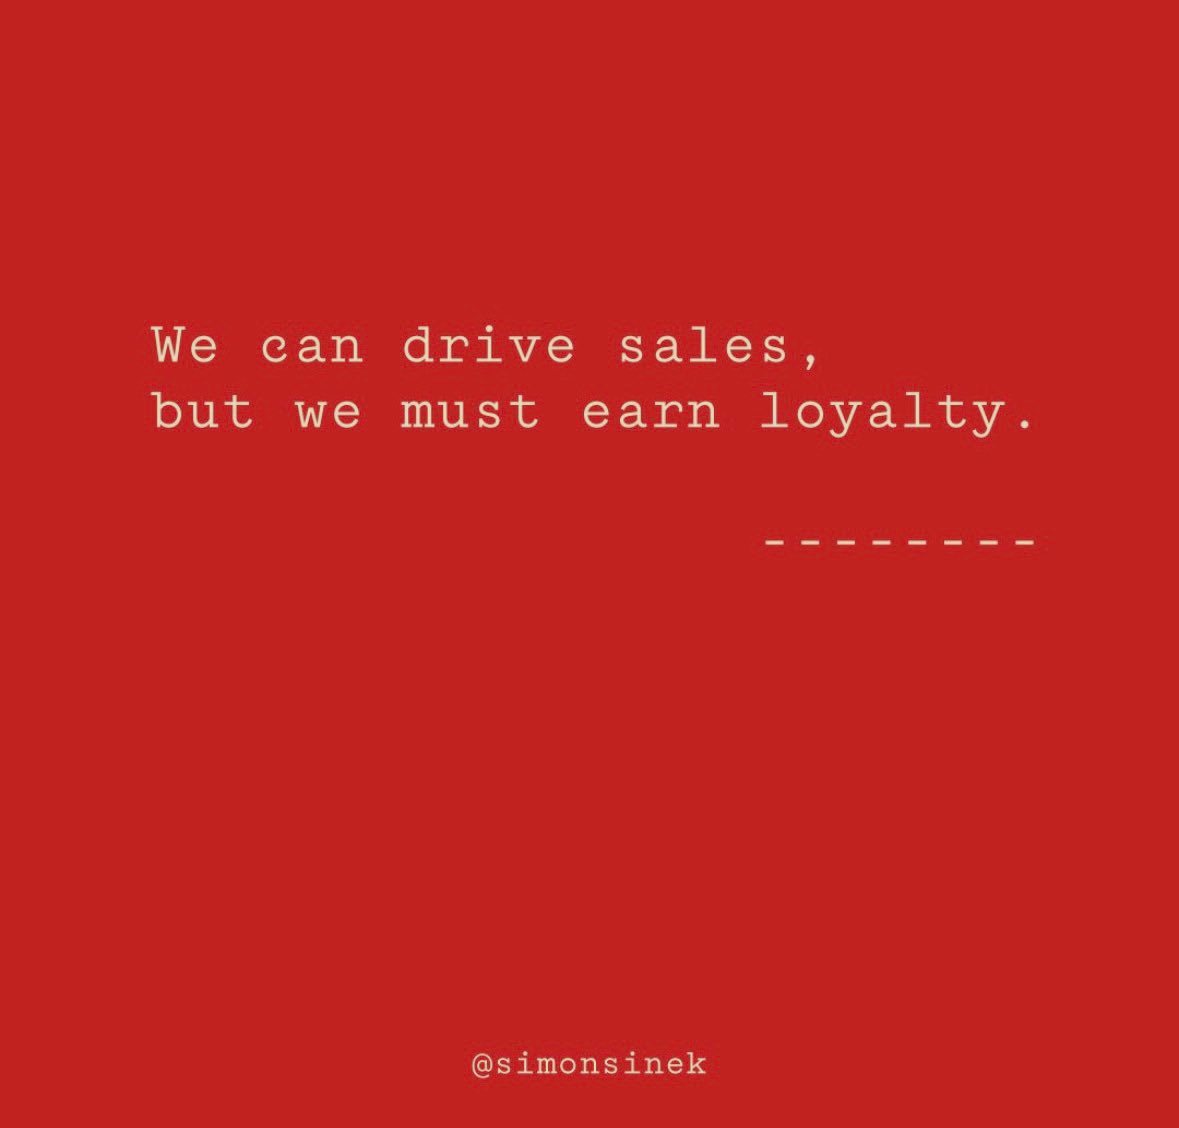 Building a loyal customer base ensures continued business and sustainable growth.

#CustomerRelationships #BuildingTrust #BusinessSuccess #CustomerLoyalty #ValueAndTrust #BusinessStrategy